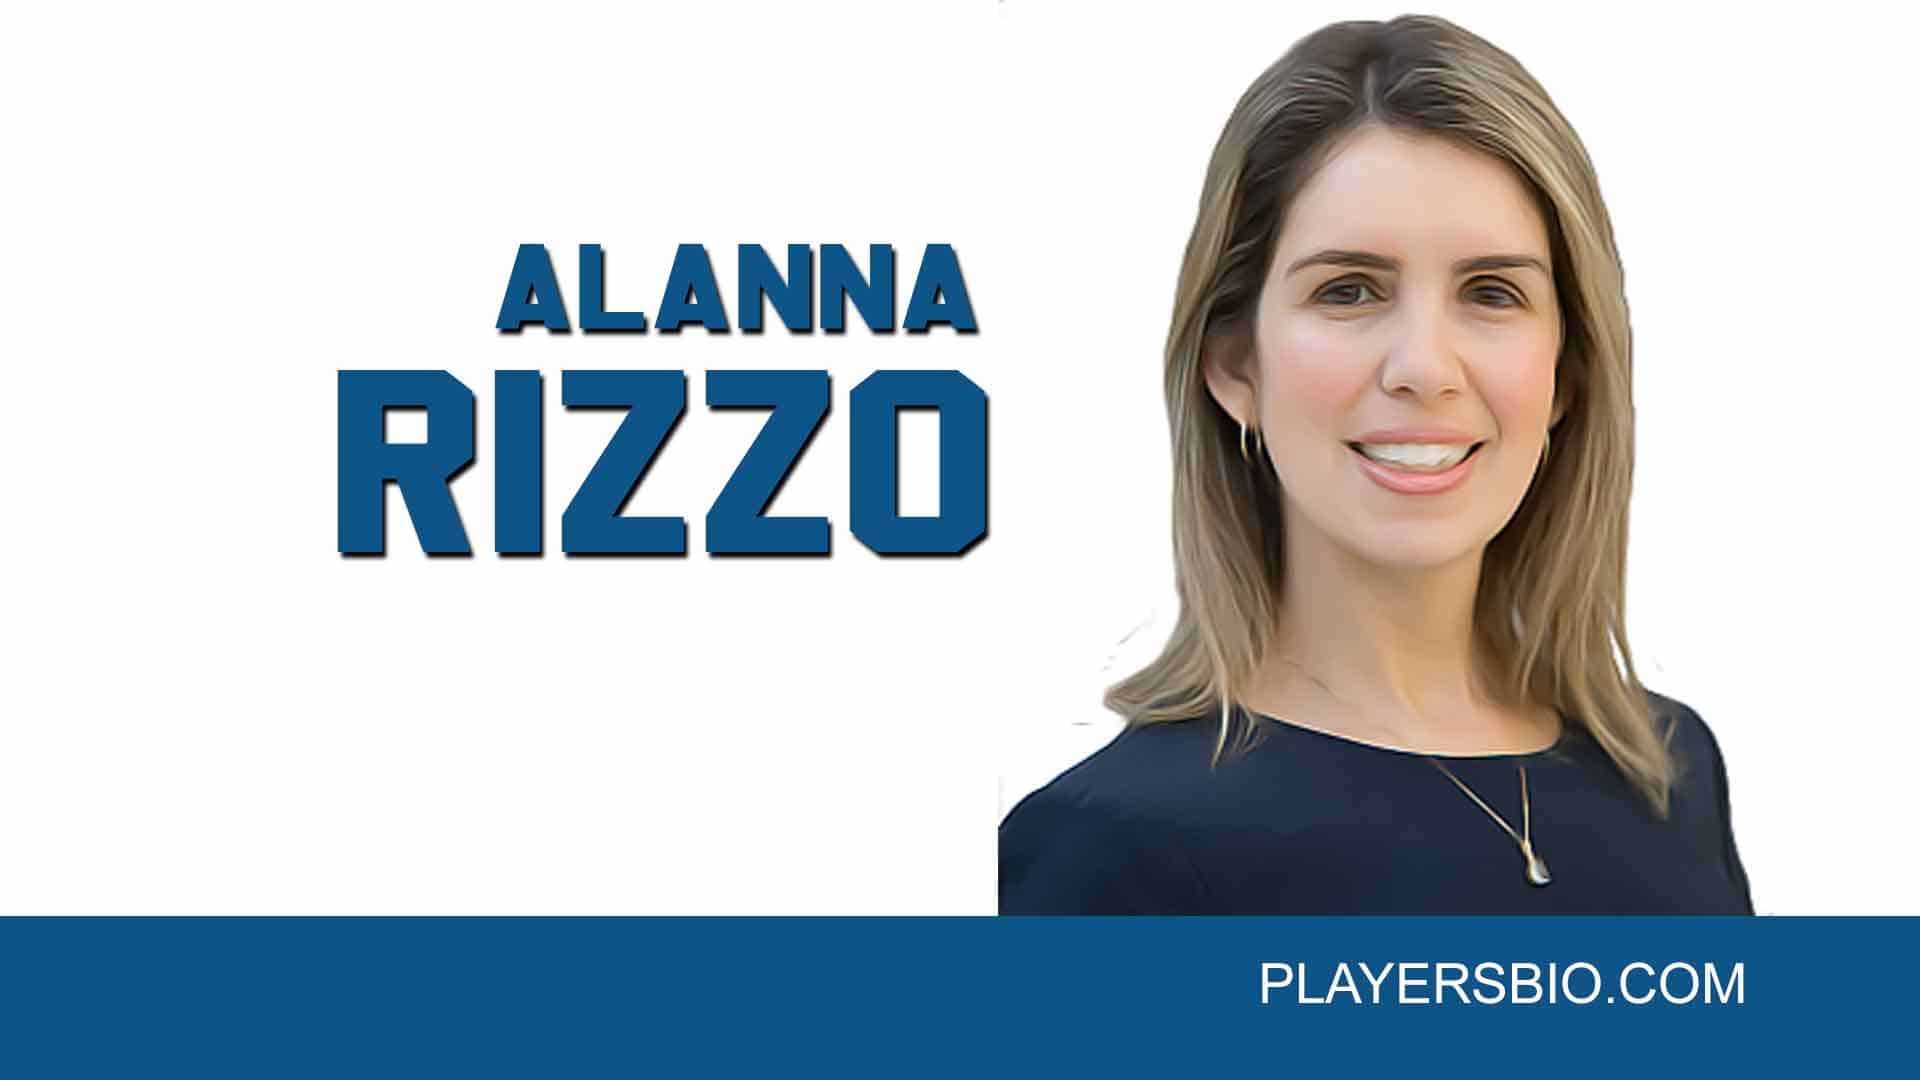 Alanna Rizzo is a 45 years old American sports reporter and anchor who is c...